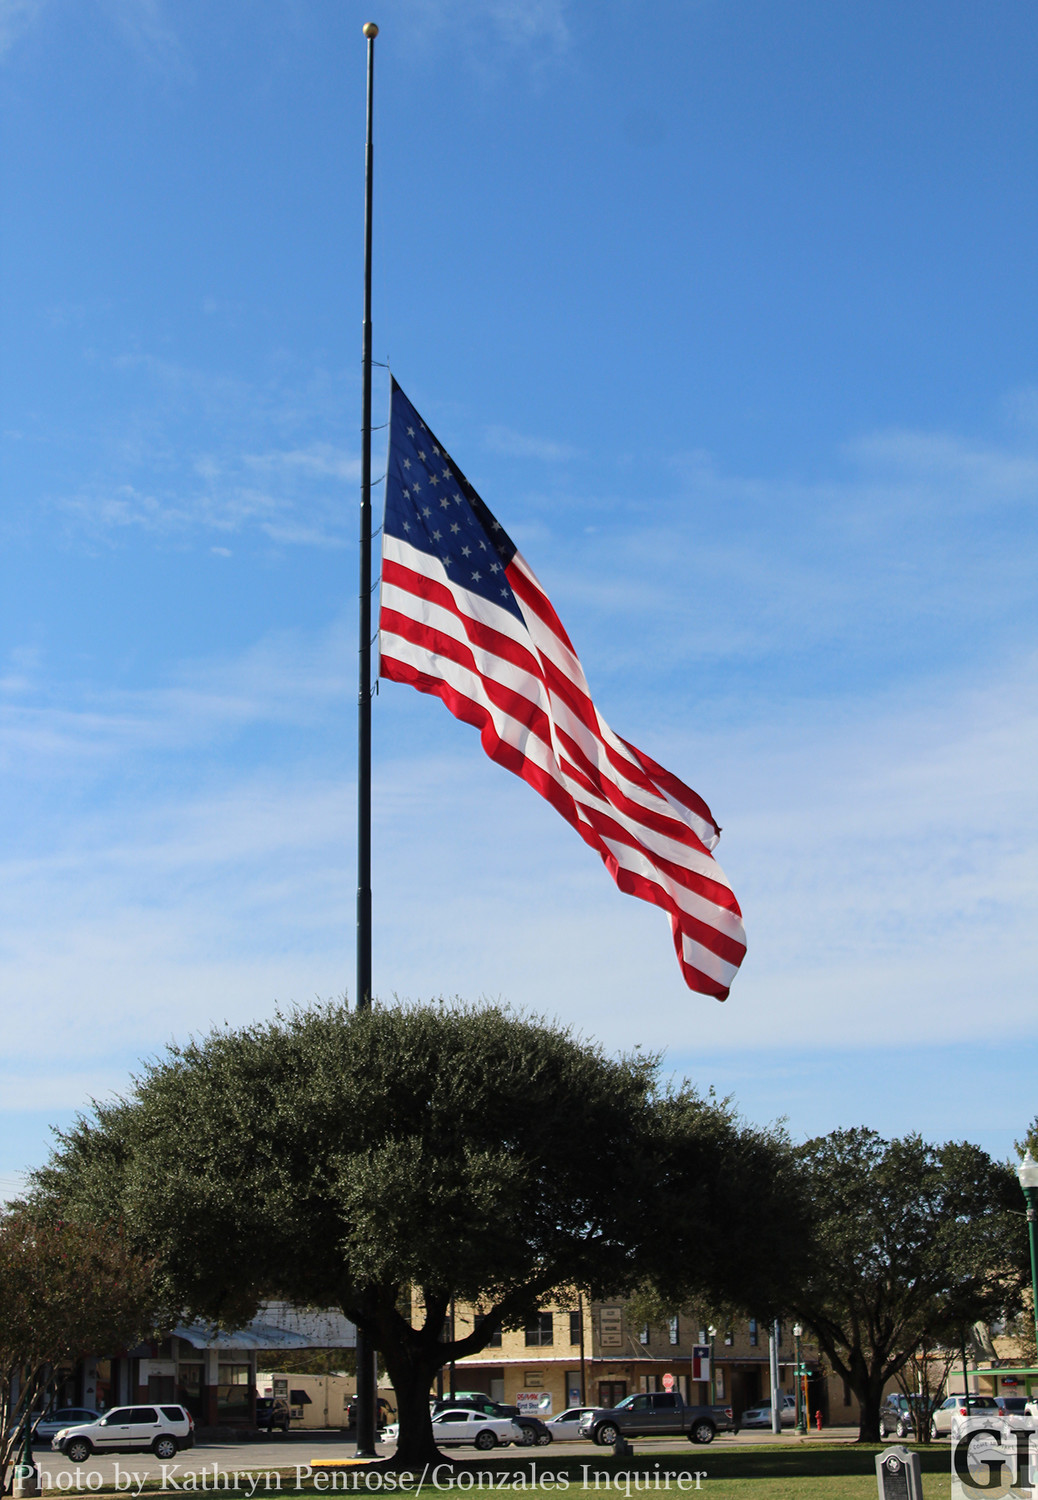 The City of Gonzales has lowered flags to half-staff in observance of a presidential proclamation honoring the victims and families affected by the mass shooting Sunday afternoon at First Baptist Church, in Sutherland Springs. The flag will remain at half-staff until sunset, on Thursday, November 9. “We offer our deepest sympathy for the families who lost loved ones in this tragic event,” Gonzales Mayor Connie Kacir said.